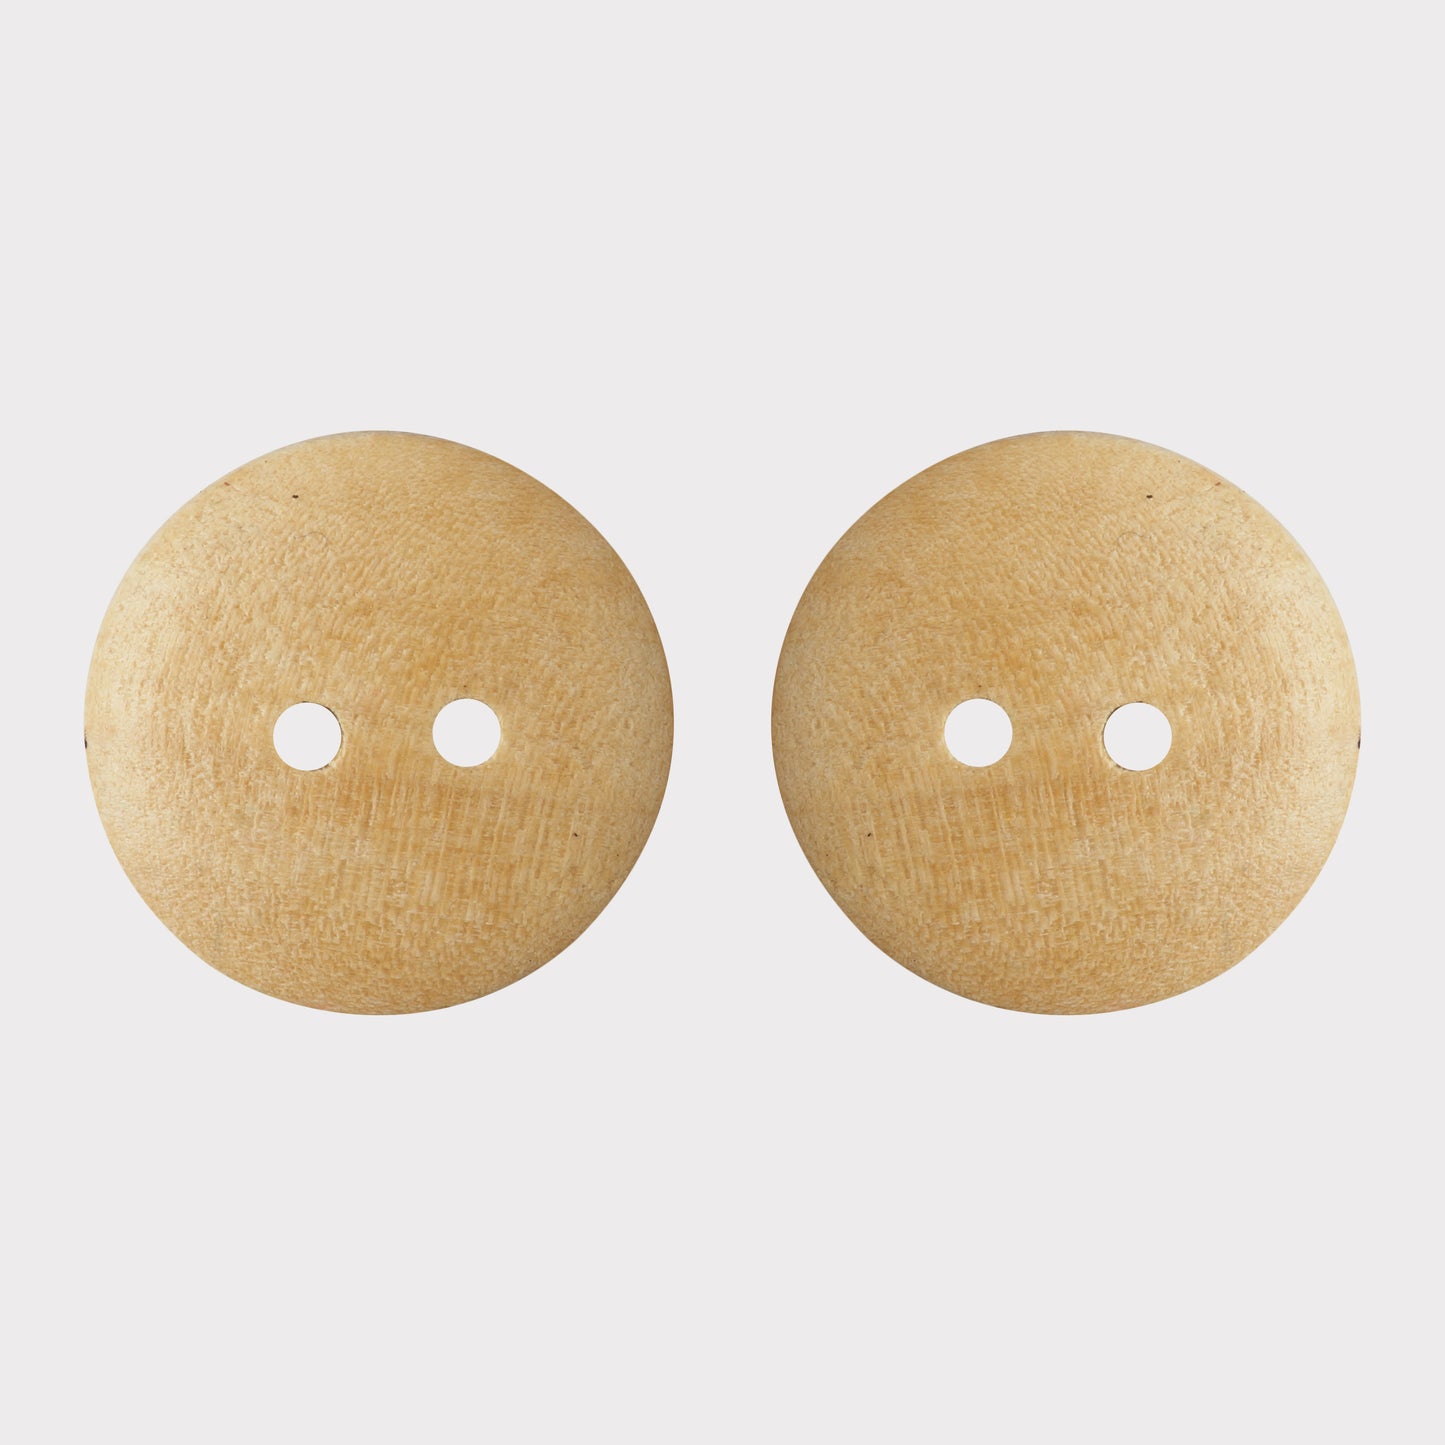 2 Holes Color Printed Latest Wooden Buttons (Pack Of 25 Pcs)